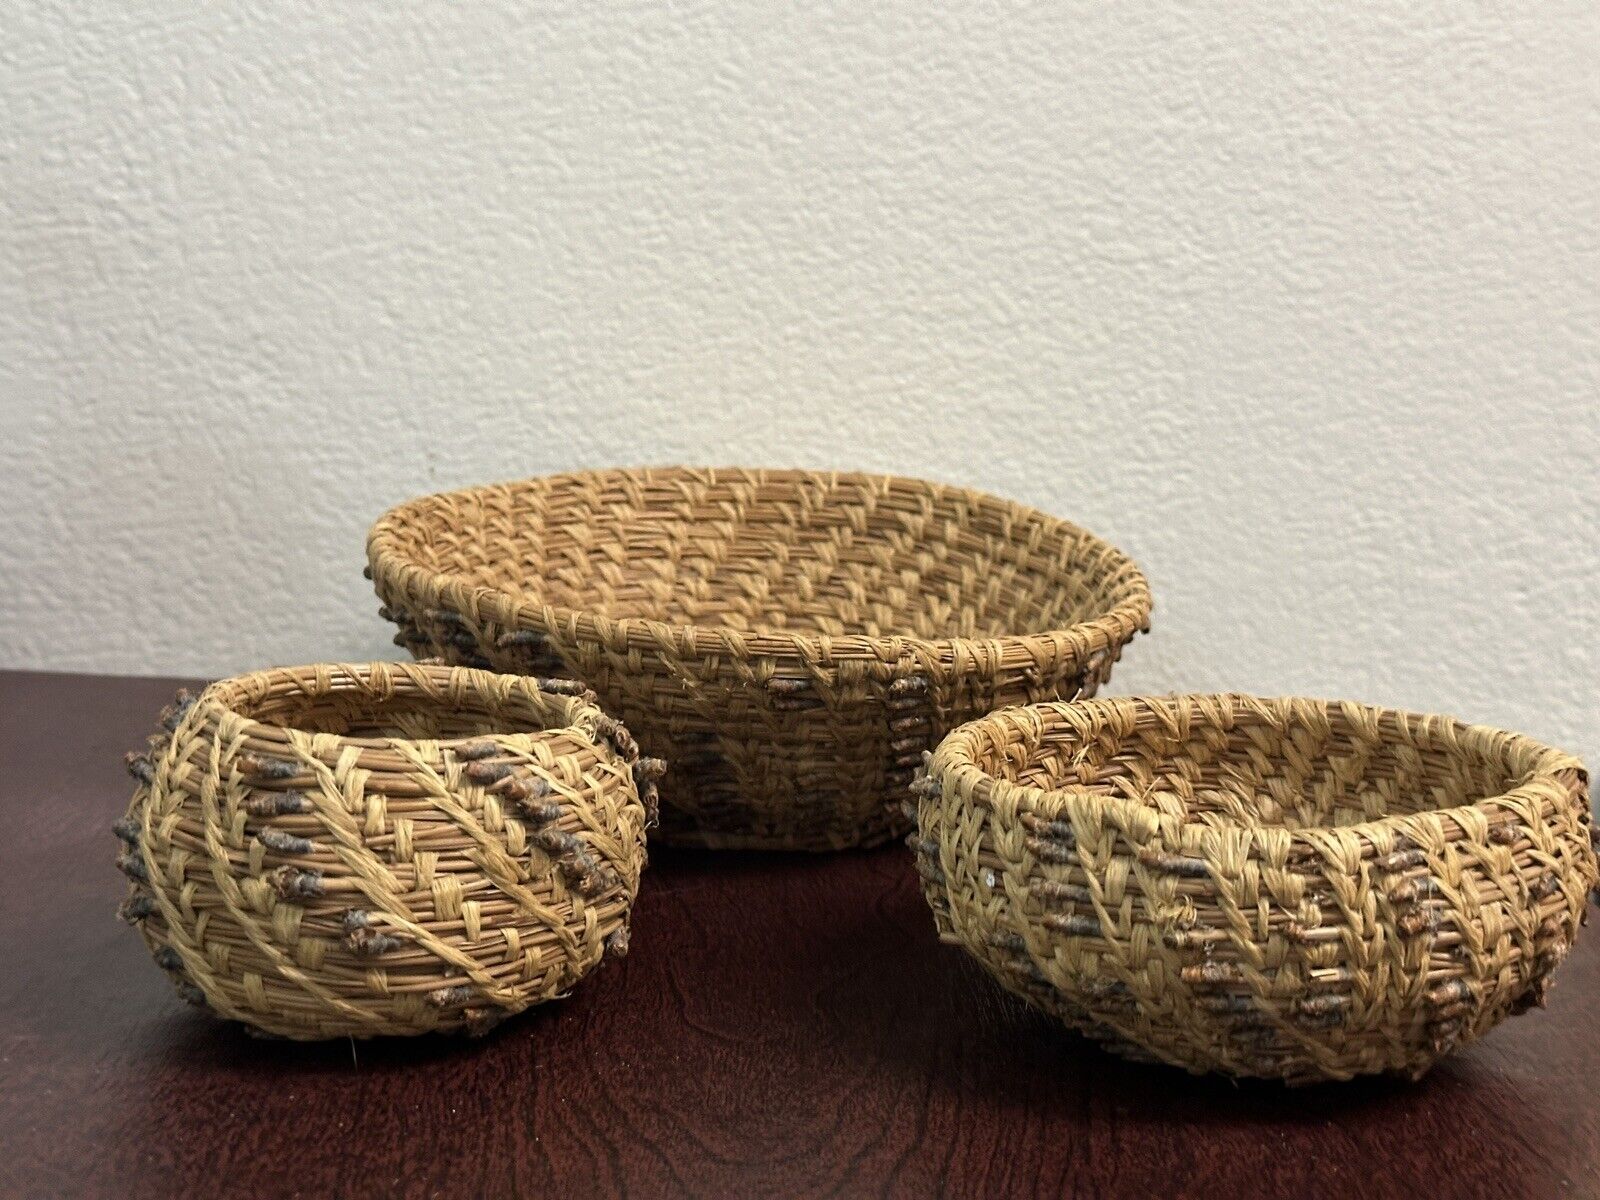 Set Of 3 Vintage Hand Made Pine Needle Bowl Nature Hand Woven Straw Artisan Lot